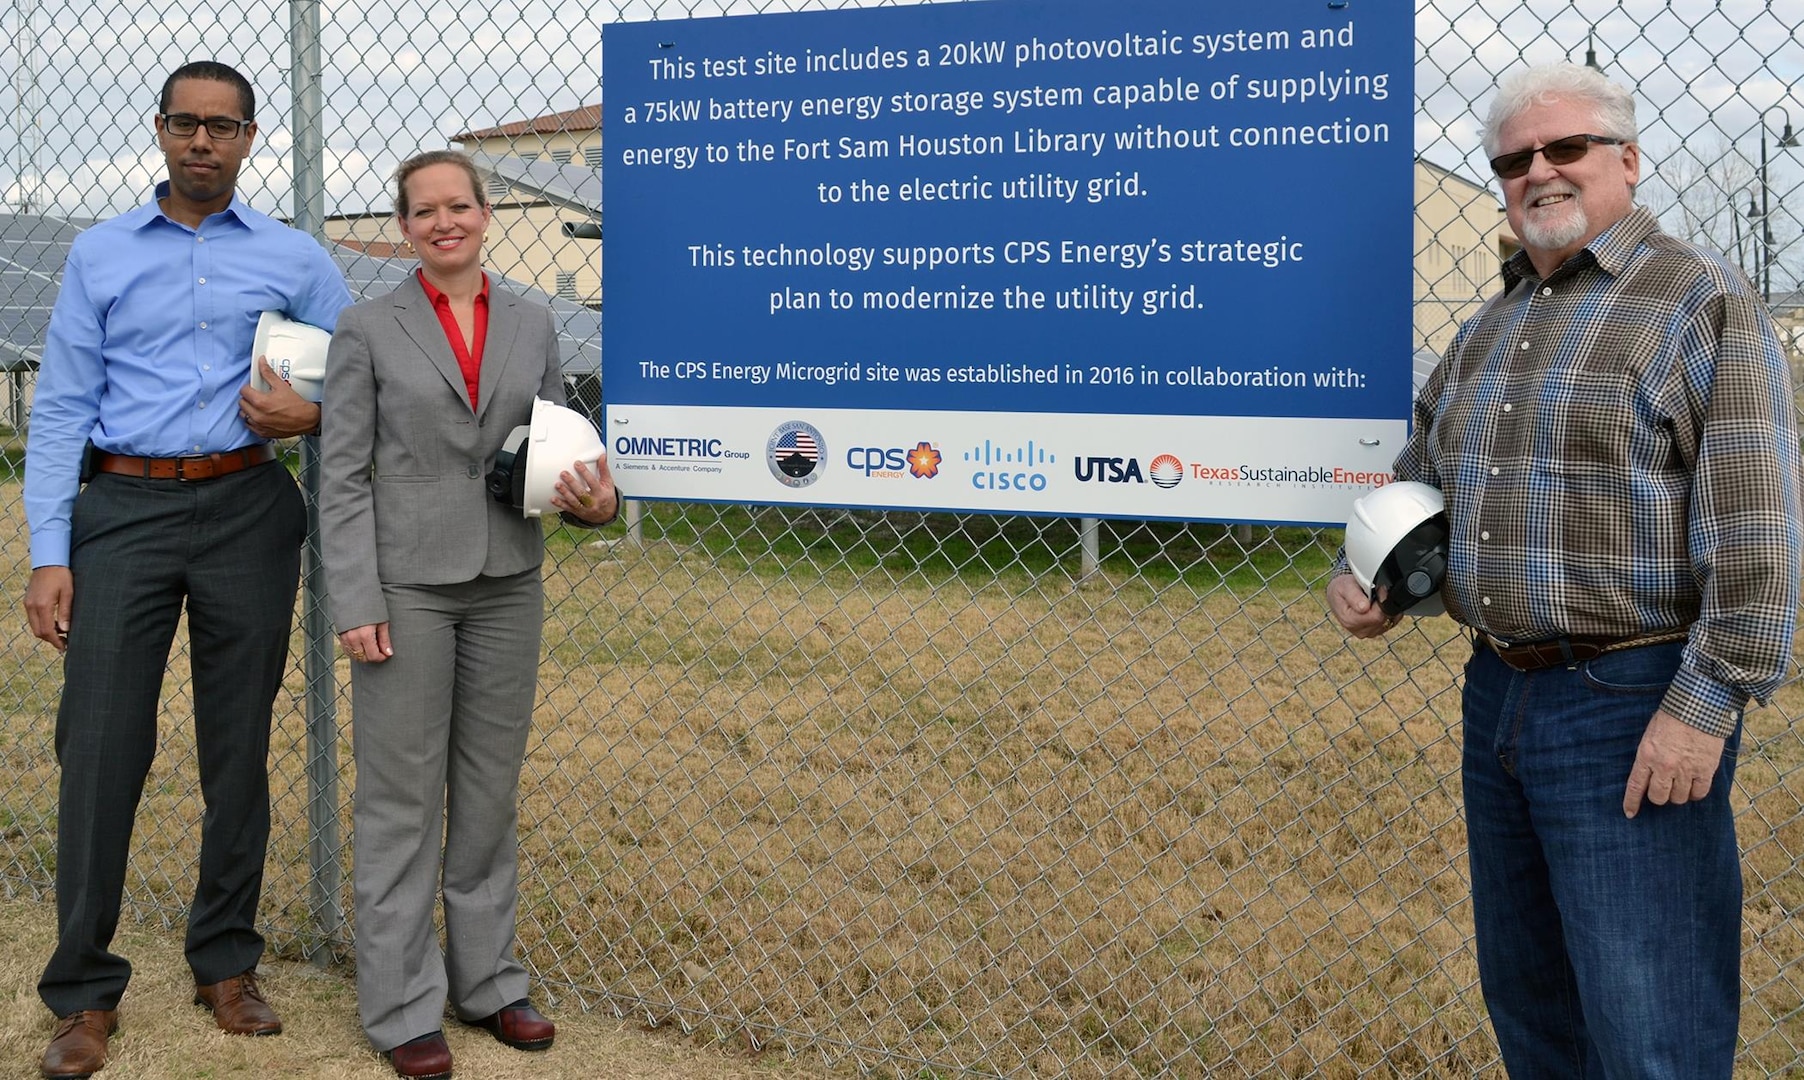 Joint Base San Antonio and CPS Energy are involved in an innovative partnership to do research on the uses and effectiveness of microgrid technology at a test site at the JBSA-Fort Sam Houston Campbell Memorial Library. Standing at the test site Jan. 13 are (from left) James Boston III, CPS Energy manager of market intelligence; Brenda Roesch, 502nd Civil Engineer Squadron JBSA engineer; and Frank Thomas, 502nd Civil Engineer Squadron JBSA resource efficiency manager.